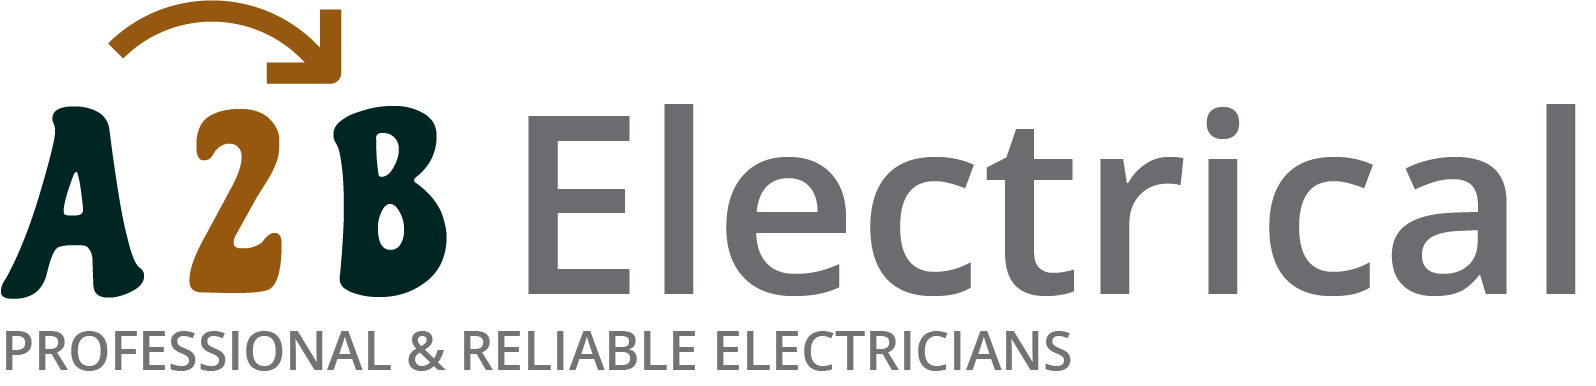 If you have electrical wiring problems in Swinton, we can provide an electrician to have a look for you. 